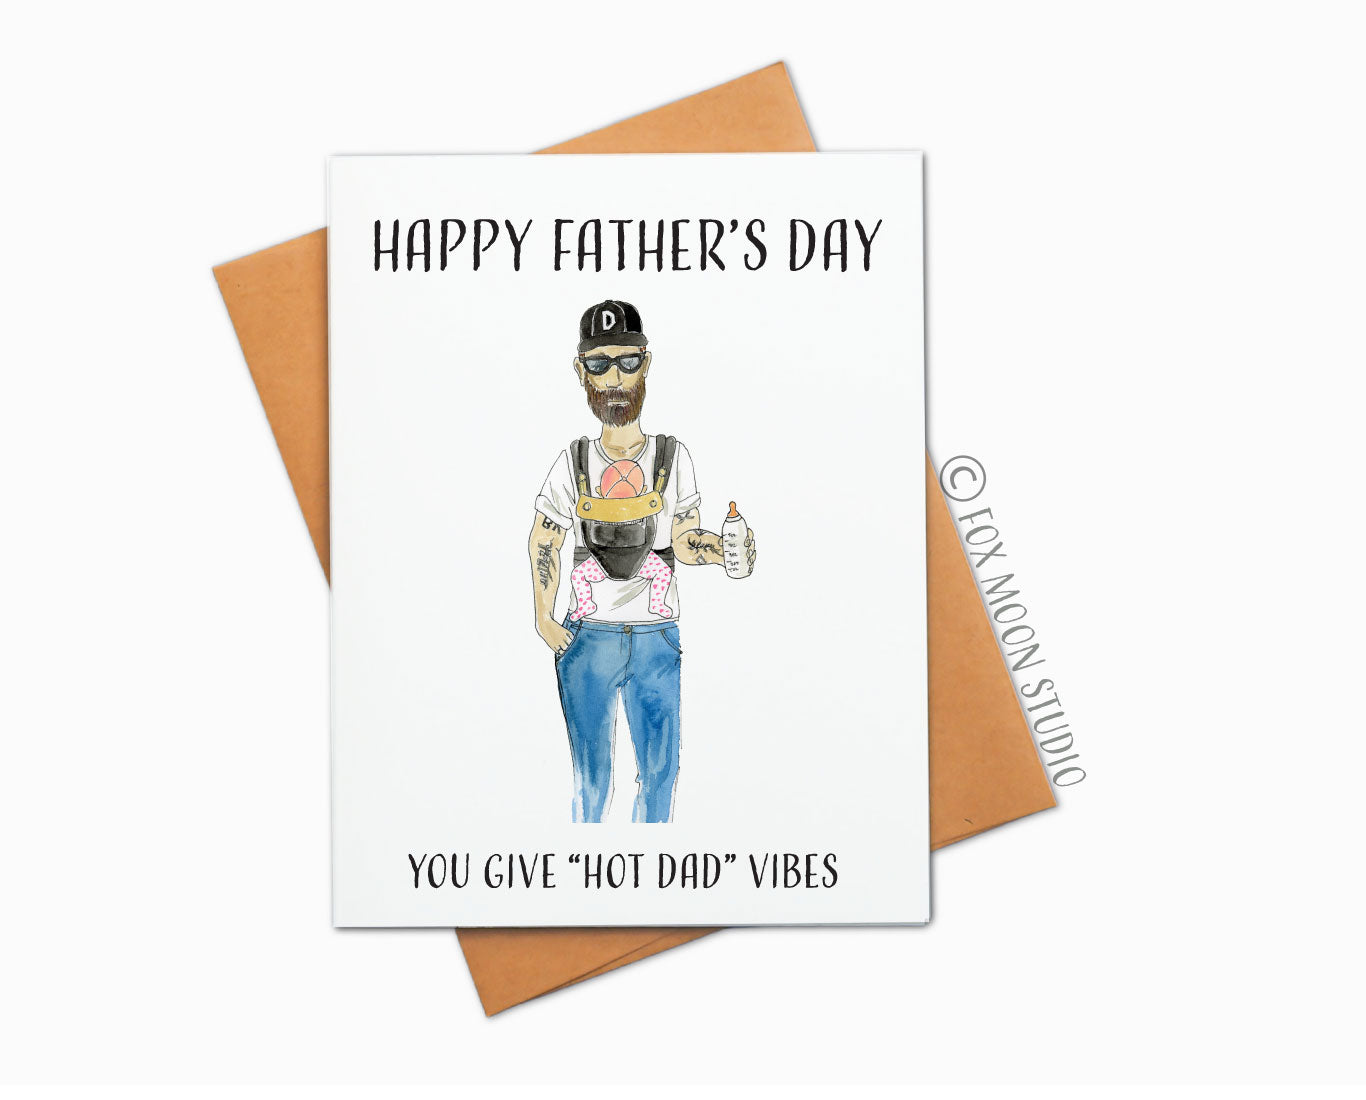 You Give "Hot Dad" Vibes - Father's Day Greeting Card